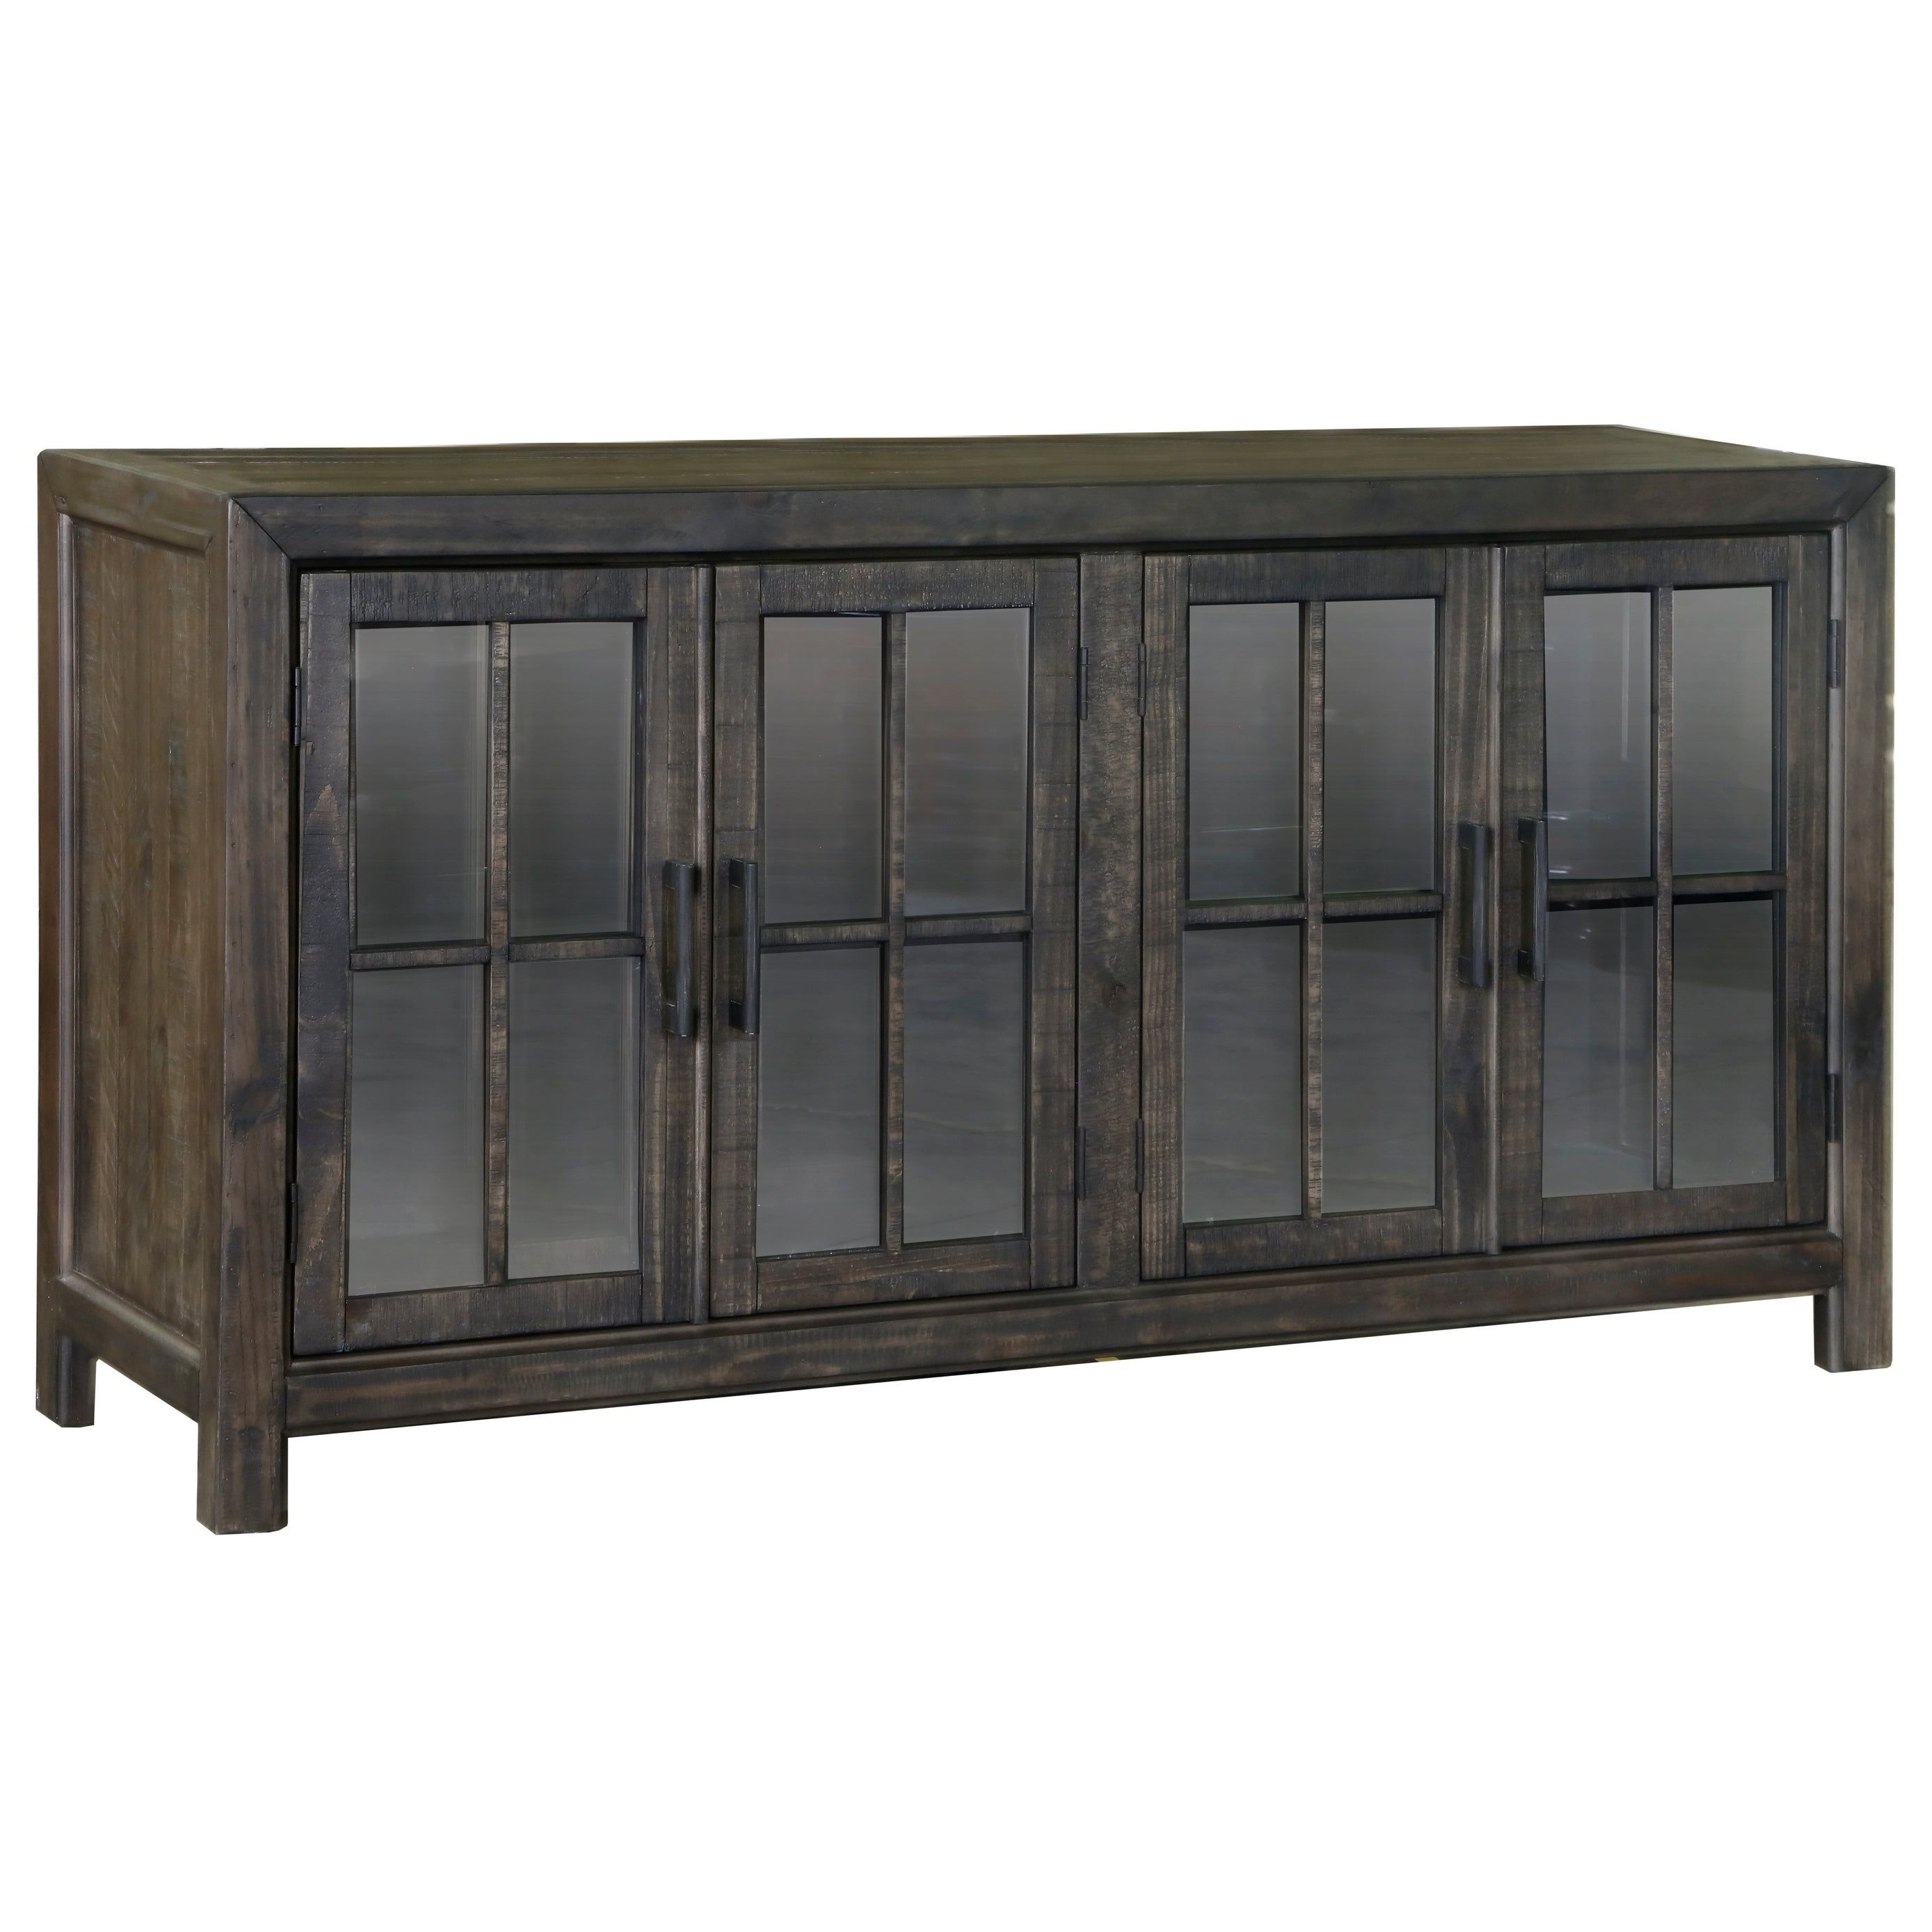 Bellamy Traditional Peppercorn Wood Buffet Curio Pertaining To Espresso Wood Multi Use Buffets (Gallery 11 of 20)